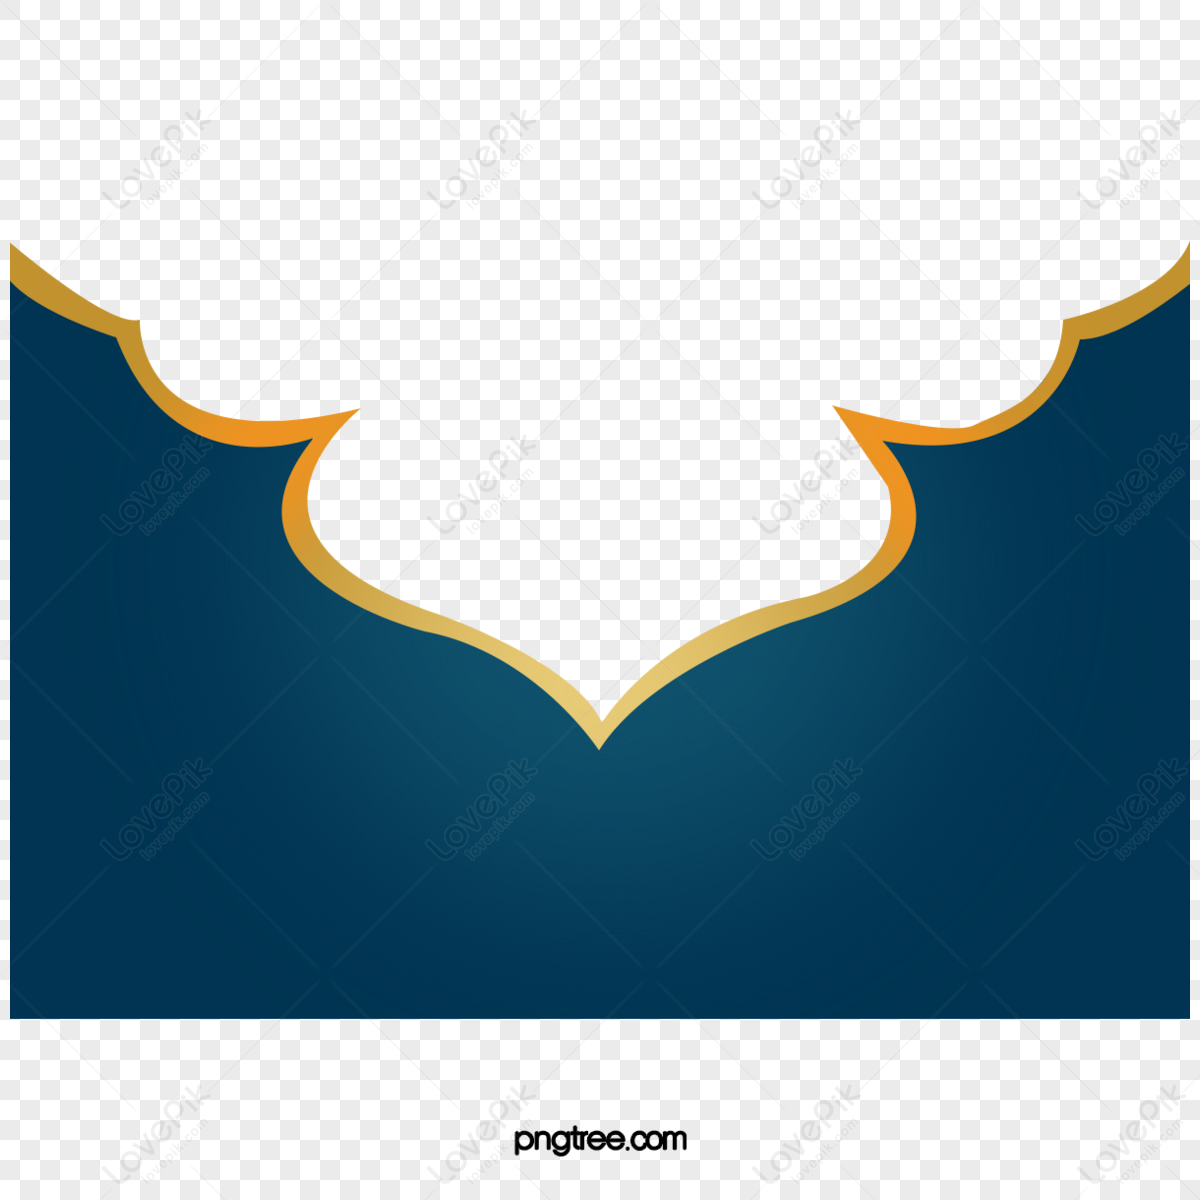 Islamic Motif Vectors PNG Images With Transparent Background | Free ...